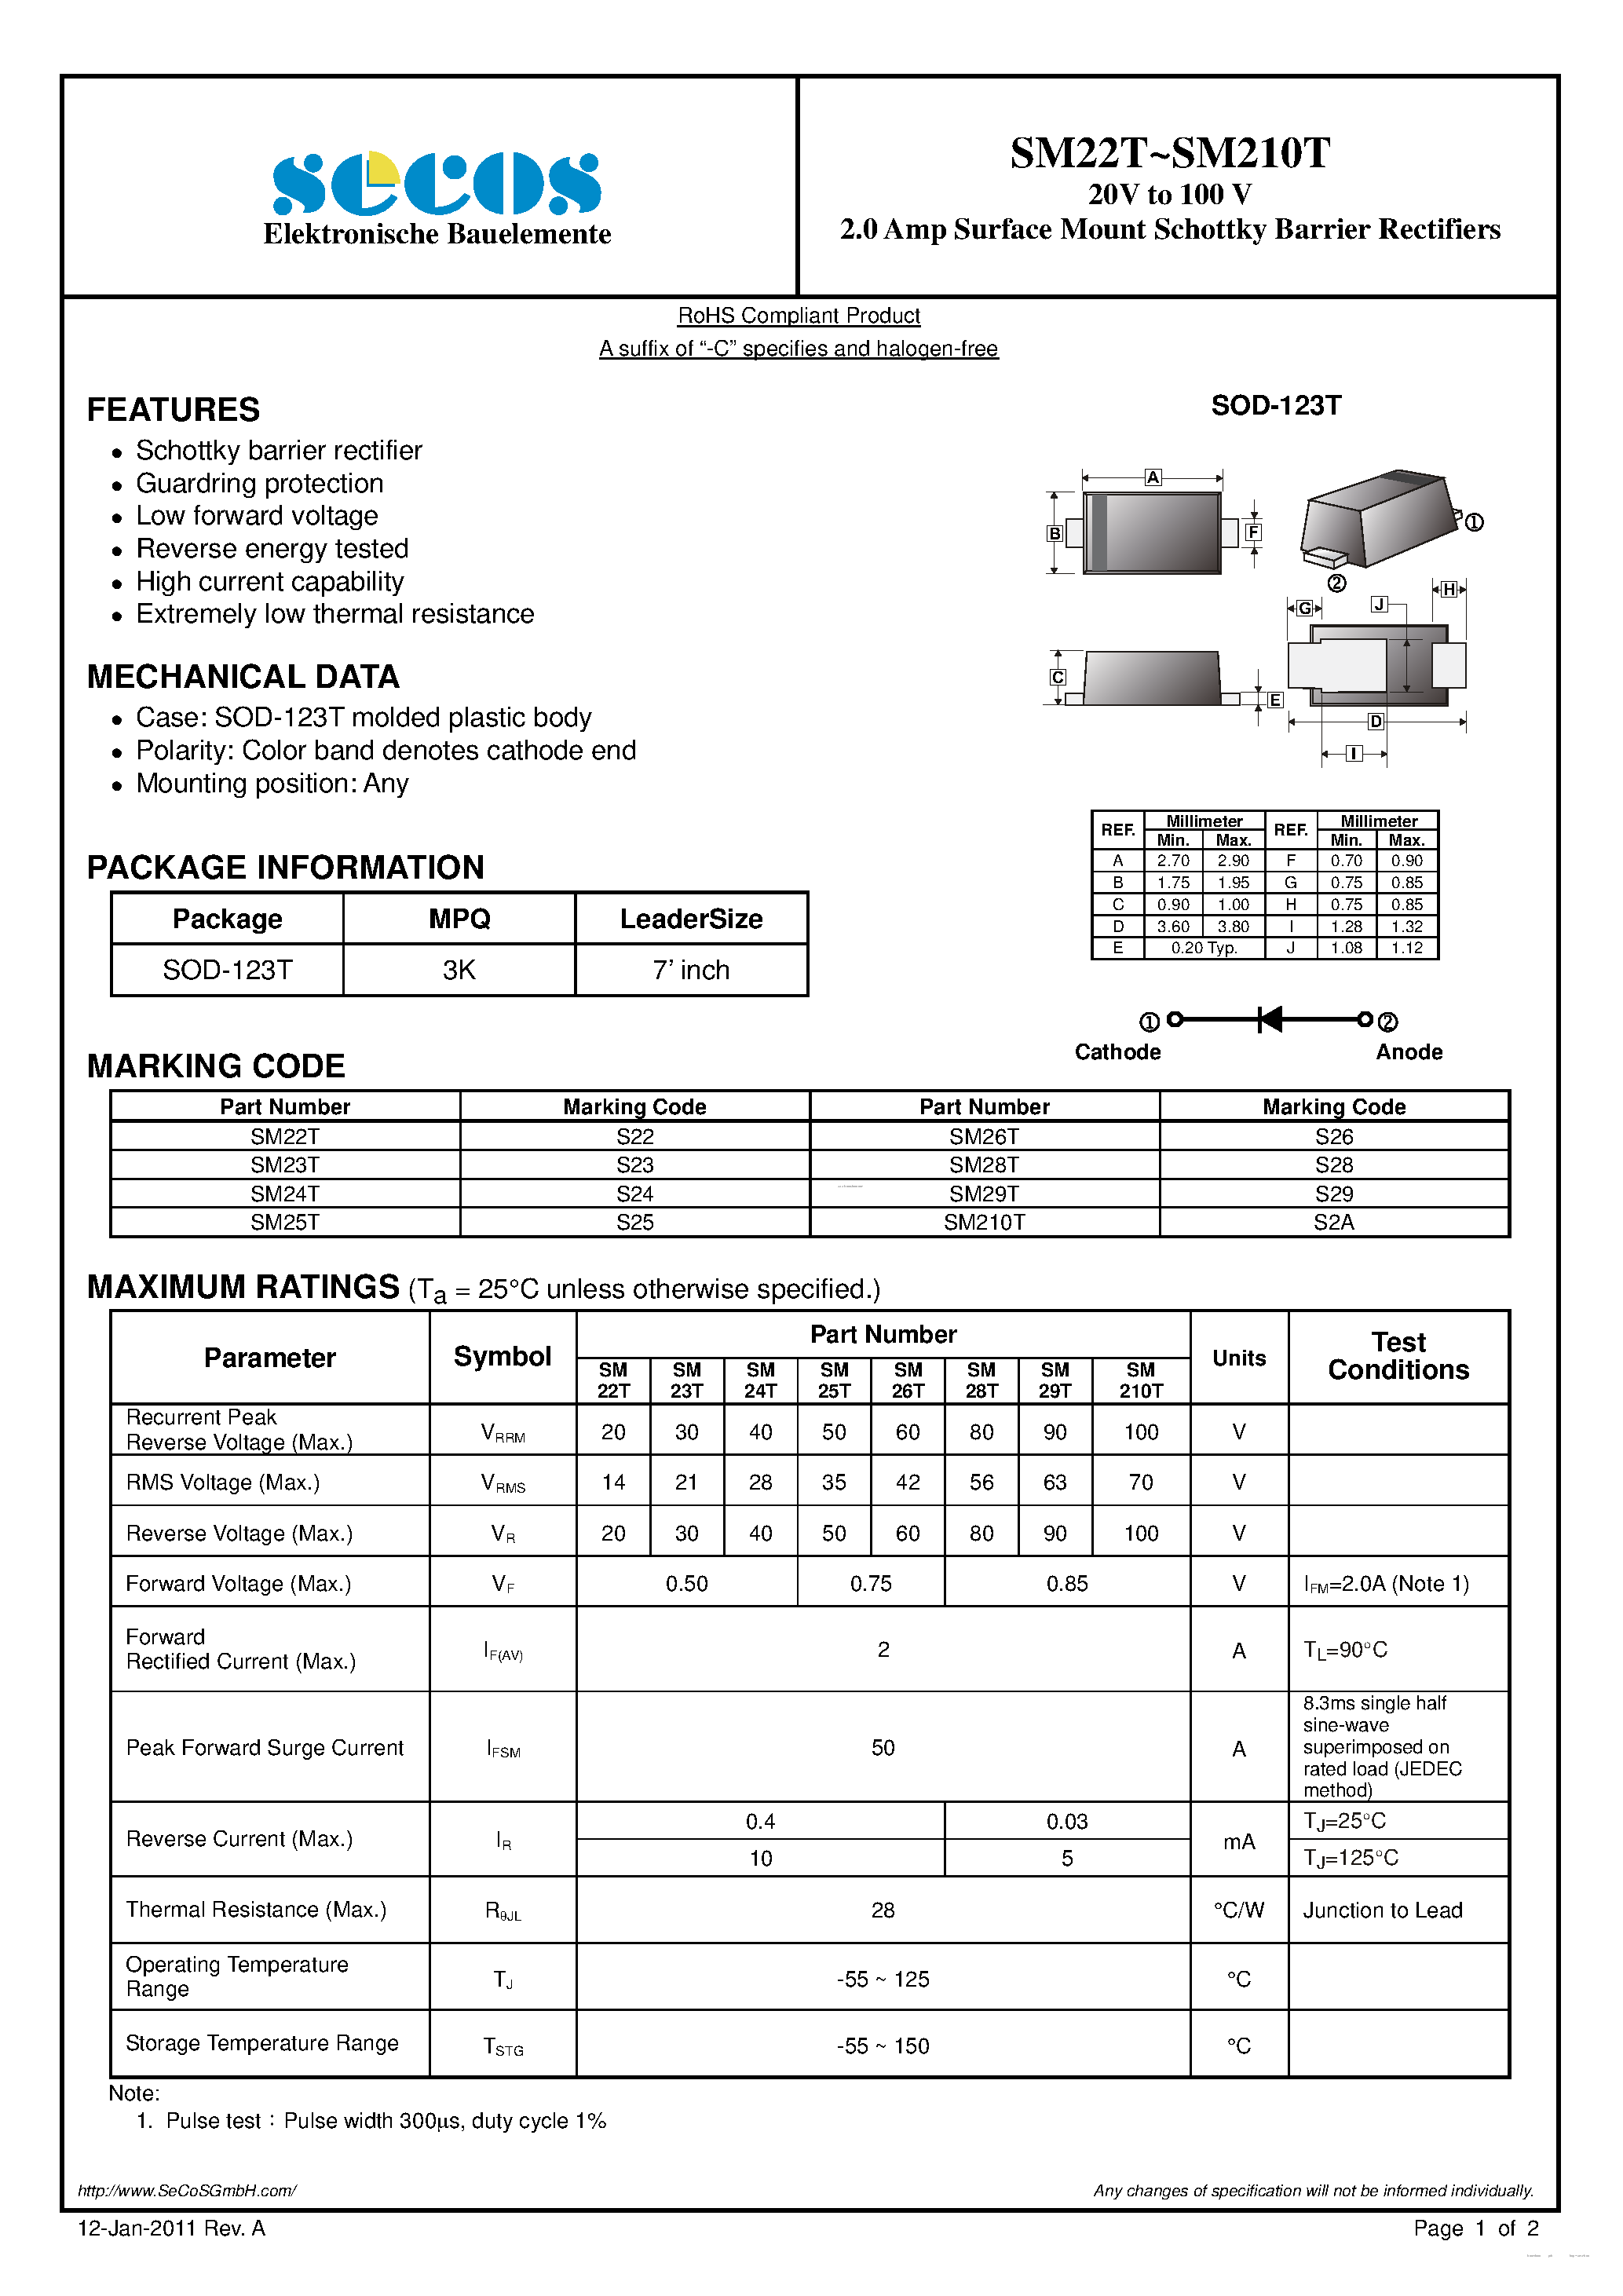 Datasheet SM210T - (SM22T - SM210T) Surface Mount Schottky Barrier Rectifiers page 1